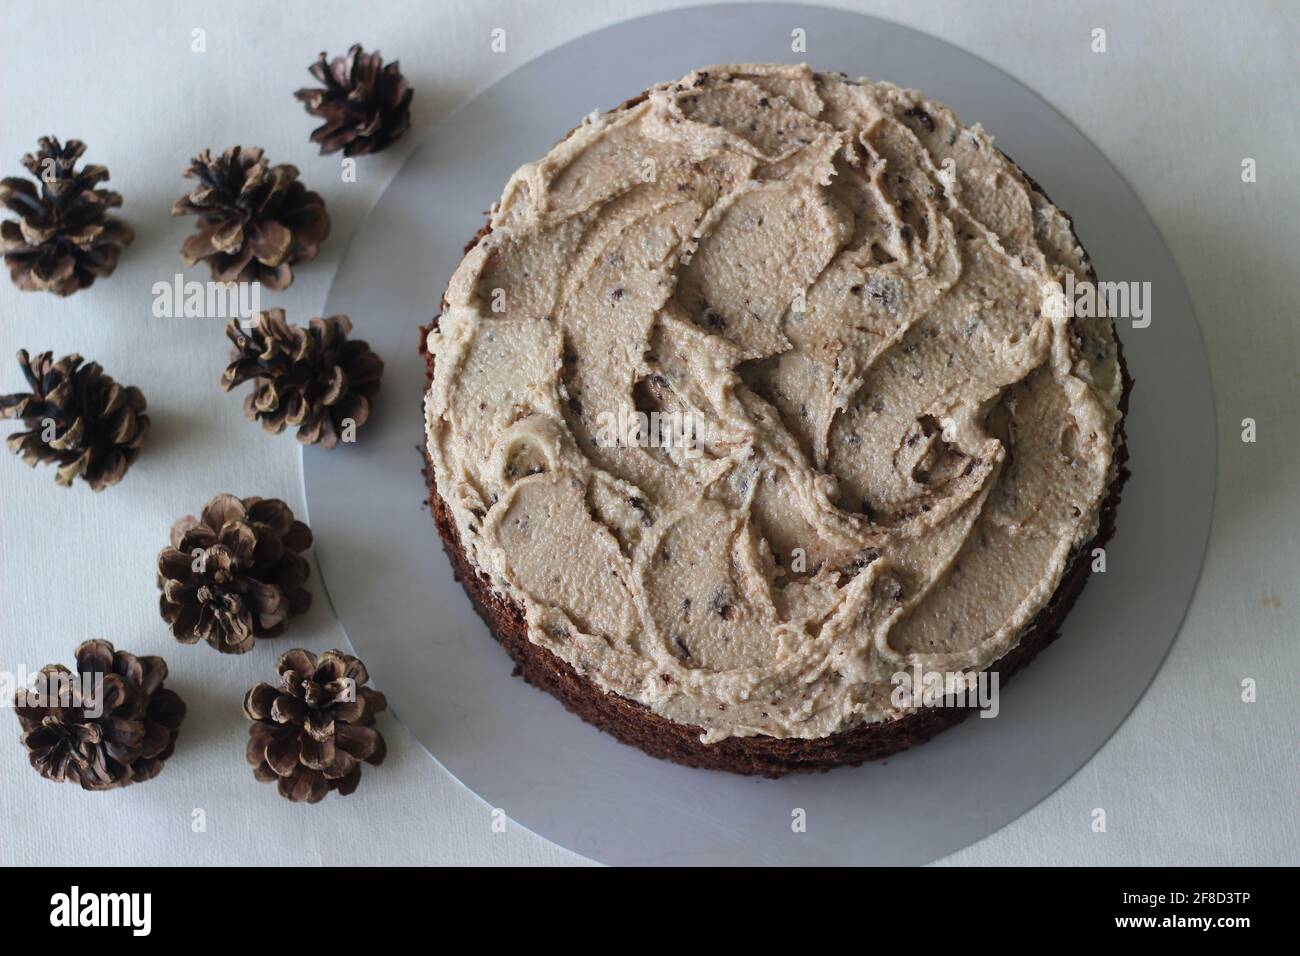 Chocolate cake with vanilla butter icing mixed with chocolate as the topping. Shot on white background. Stock Photo